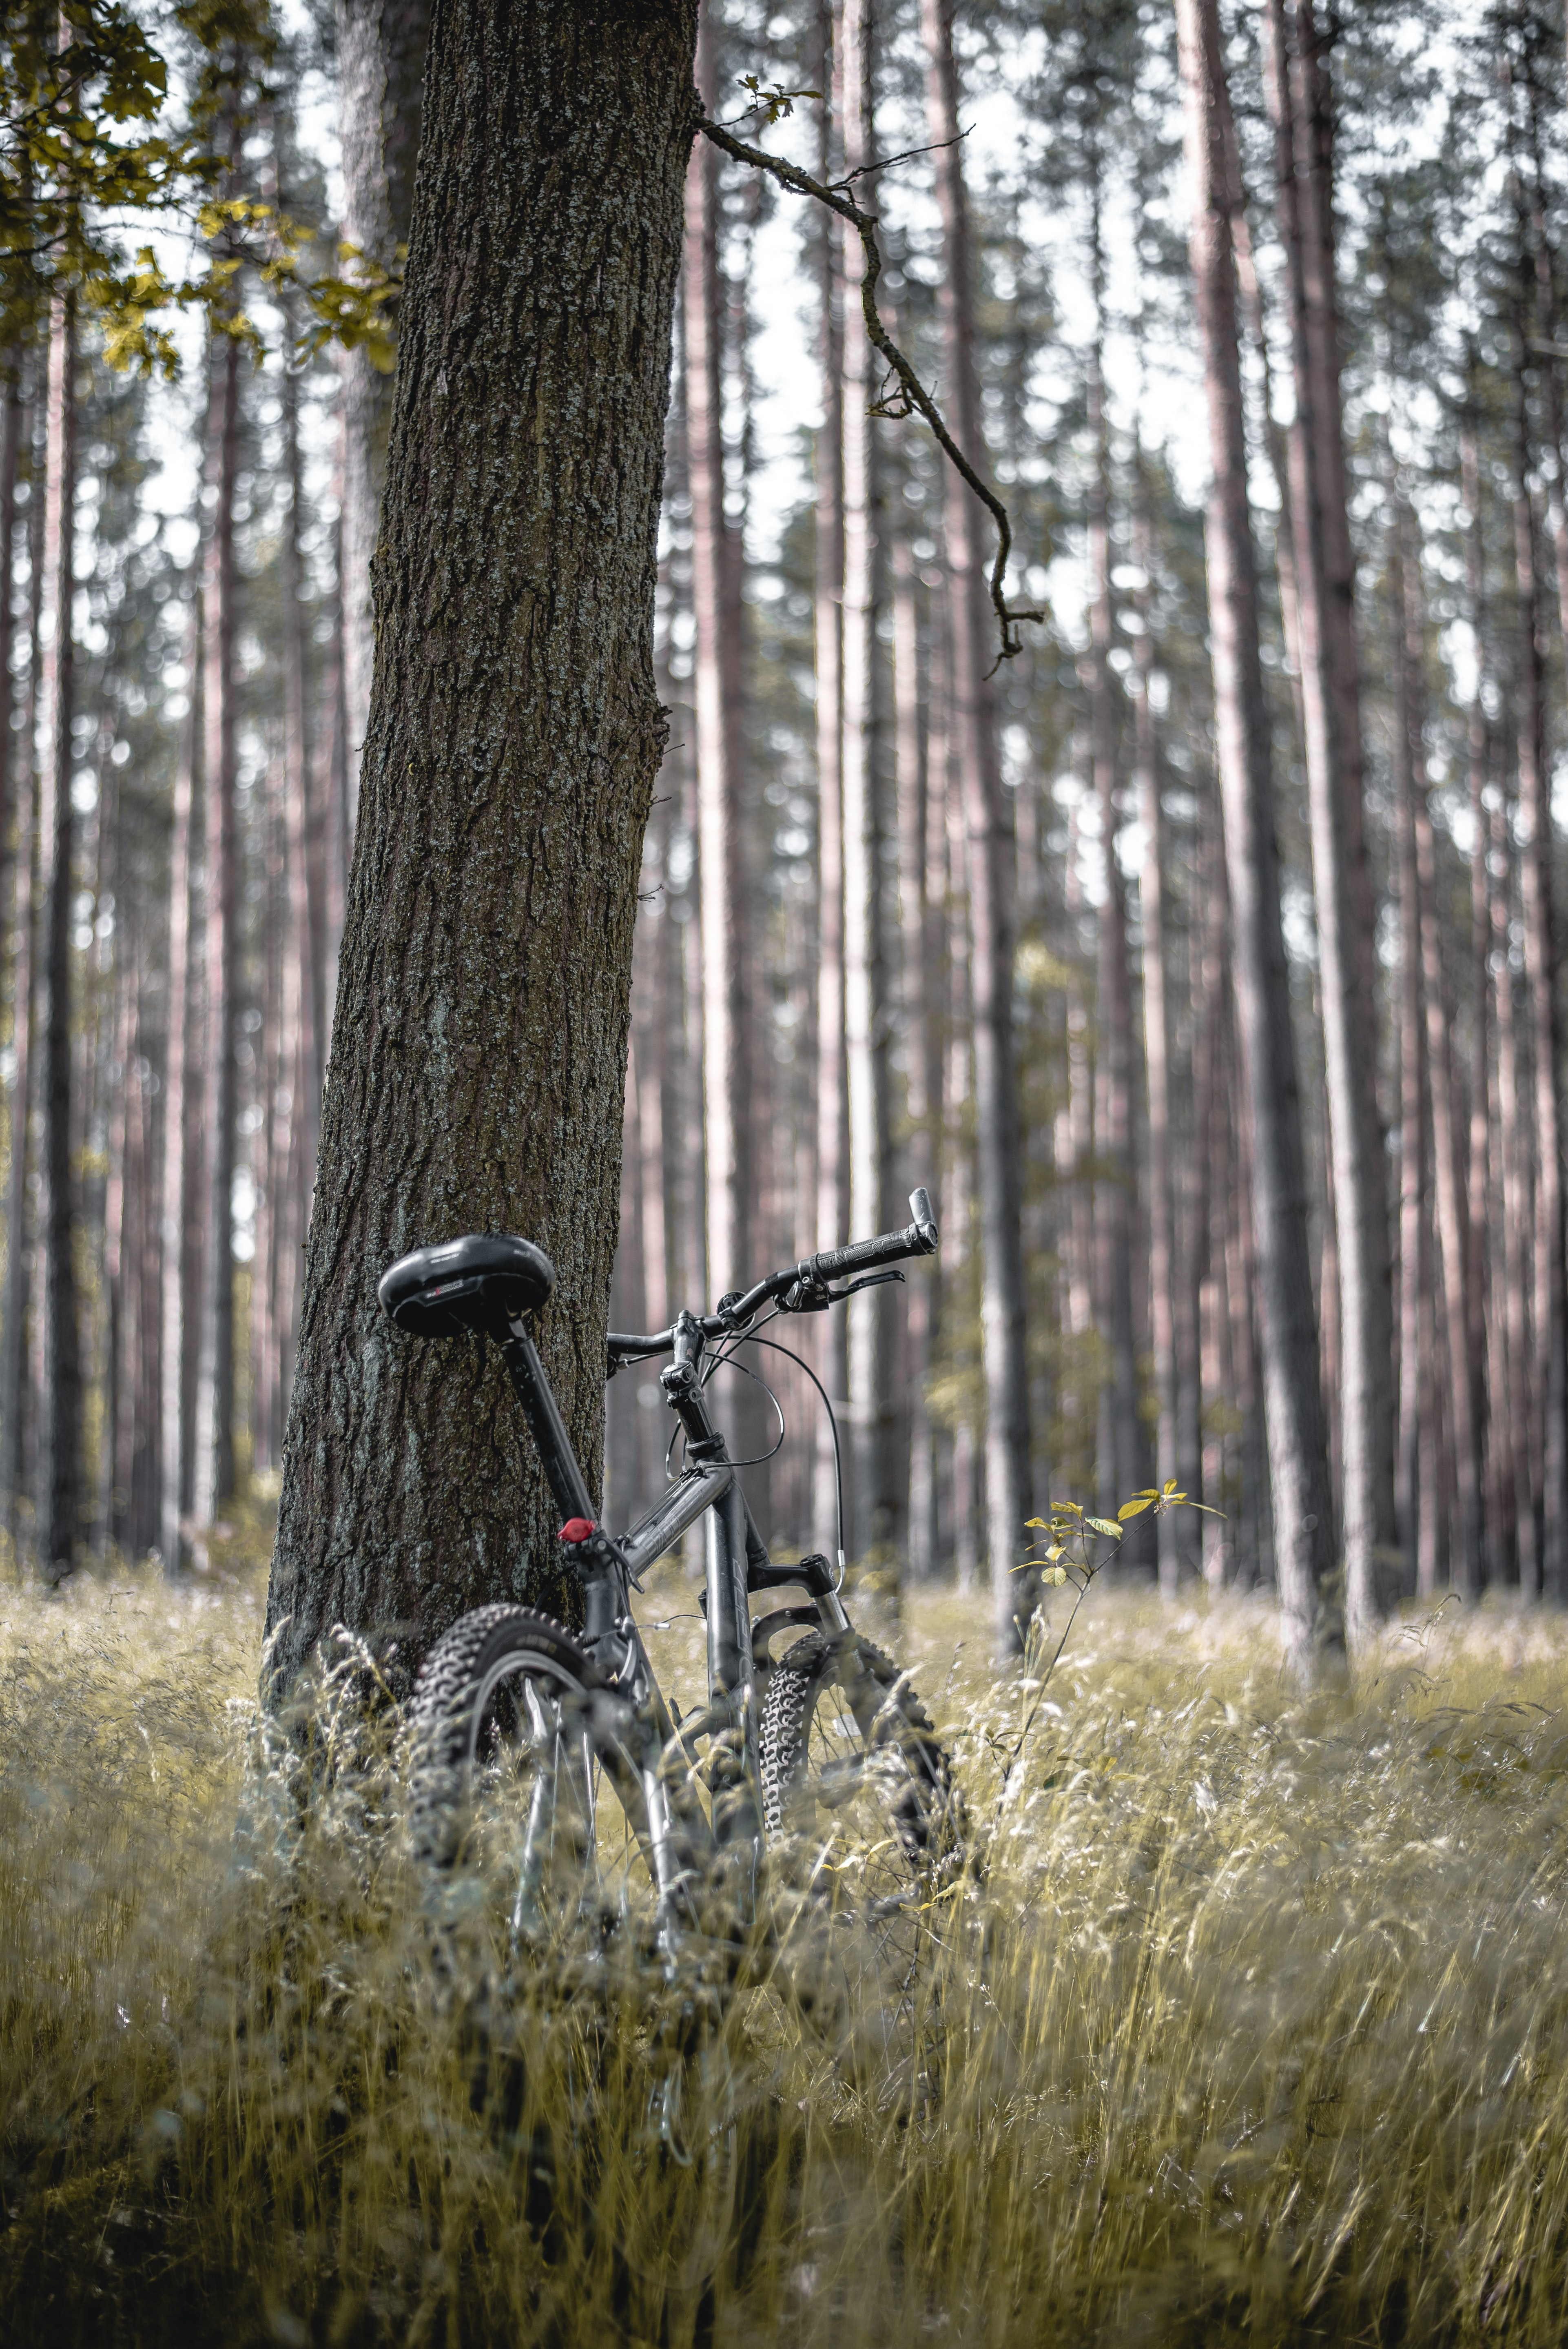 miscellaneous, trees, miscellanea, forest, stroll, bicycle